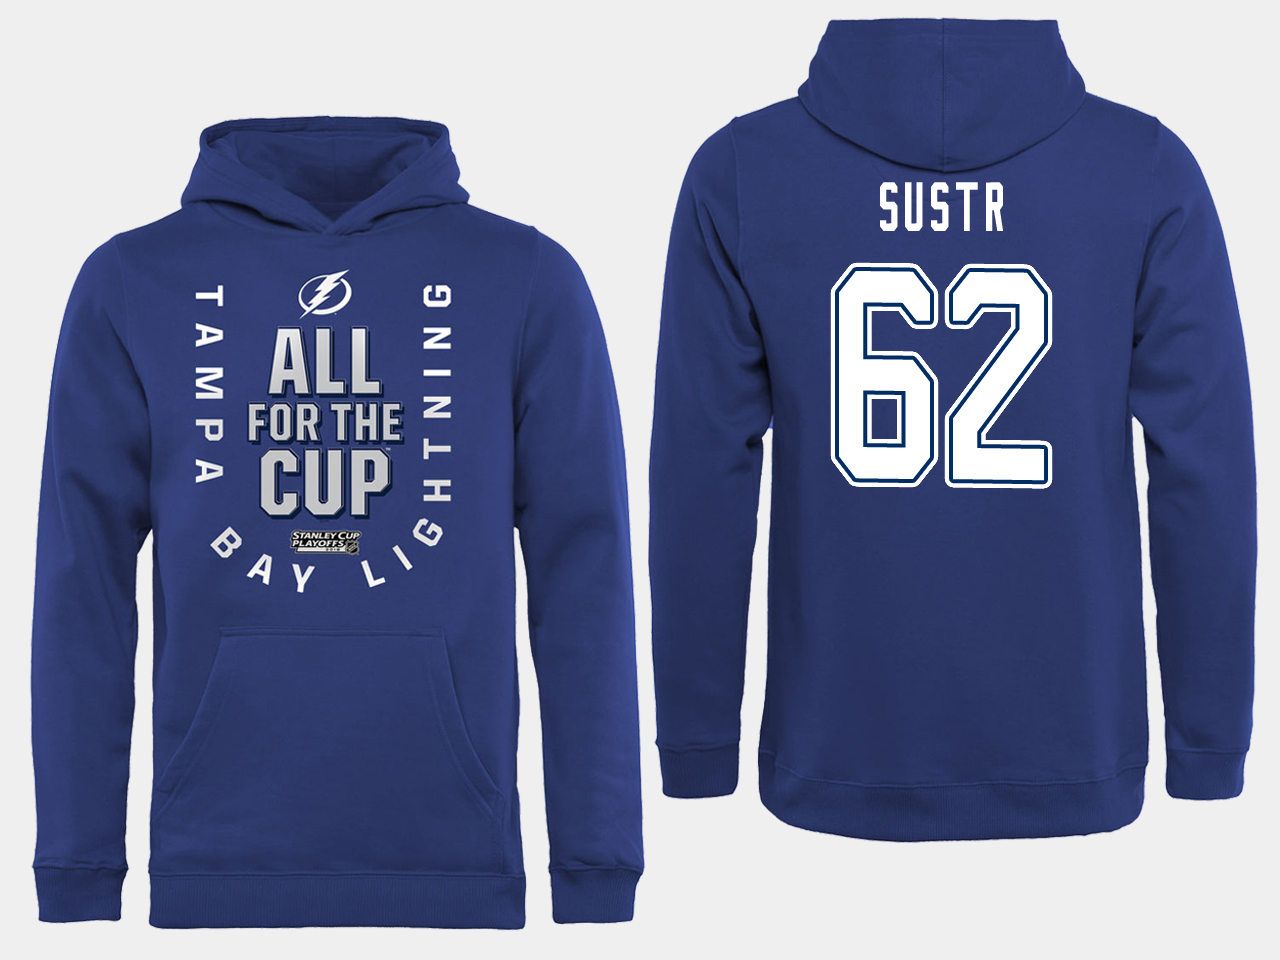 NHL Men adidas Tampa Bay Lightning 62 Sustr blue All for the Cup Hoodie